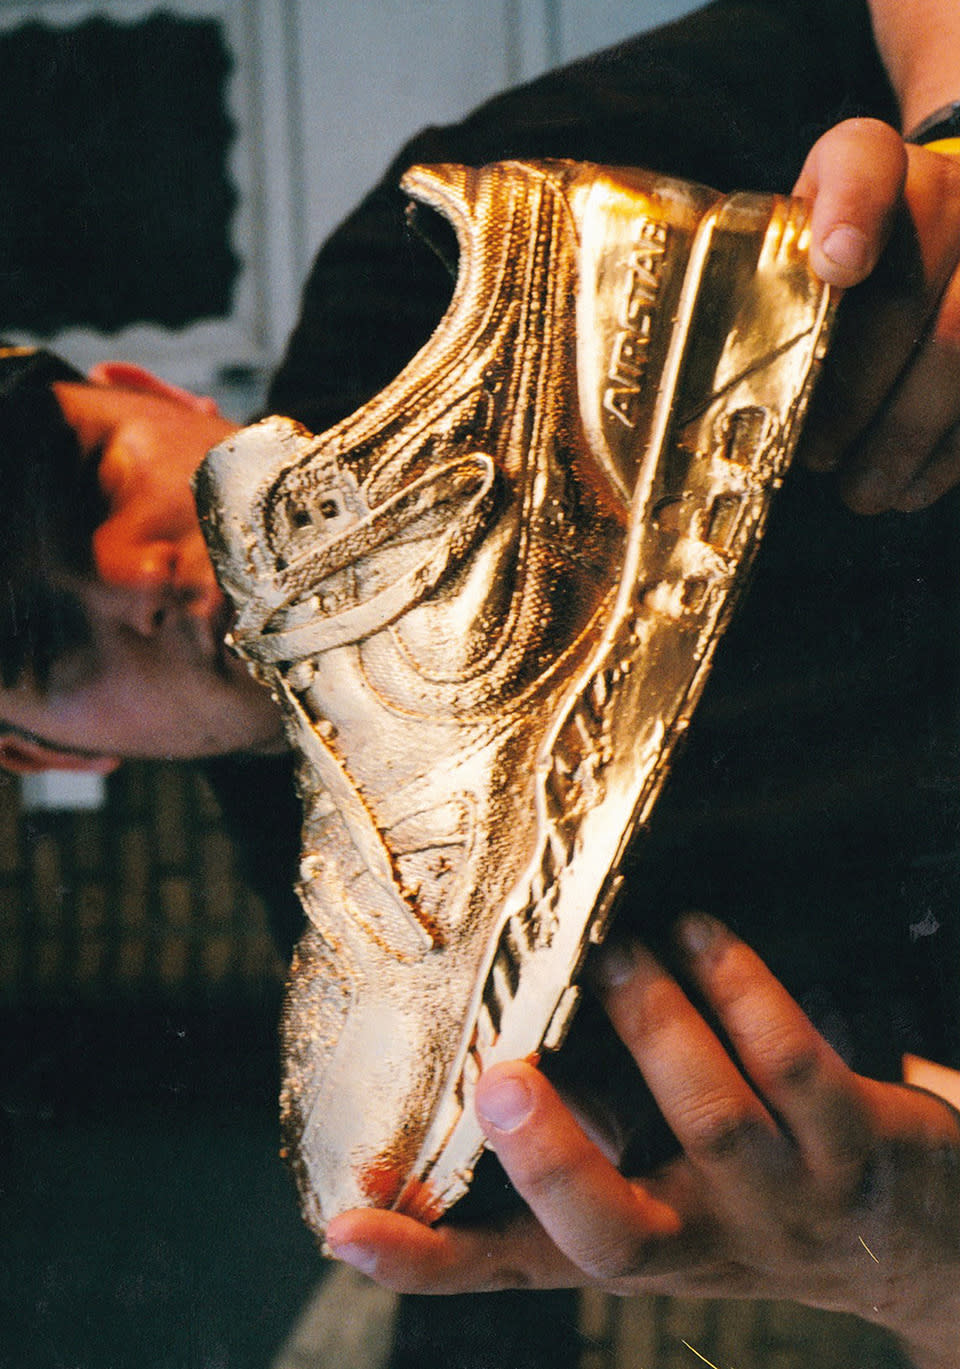 Tommy Rebel holding a 24 karat gold-plated Air Stab sneaker.